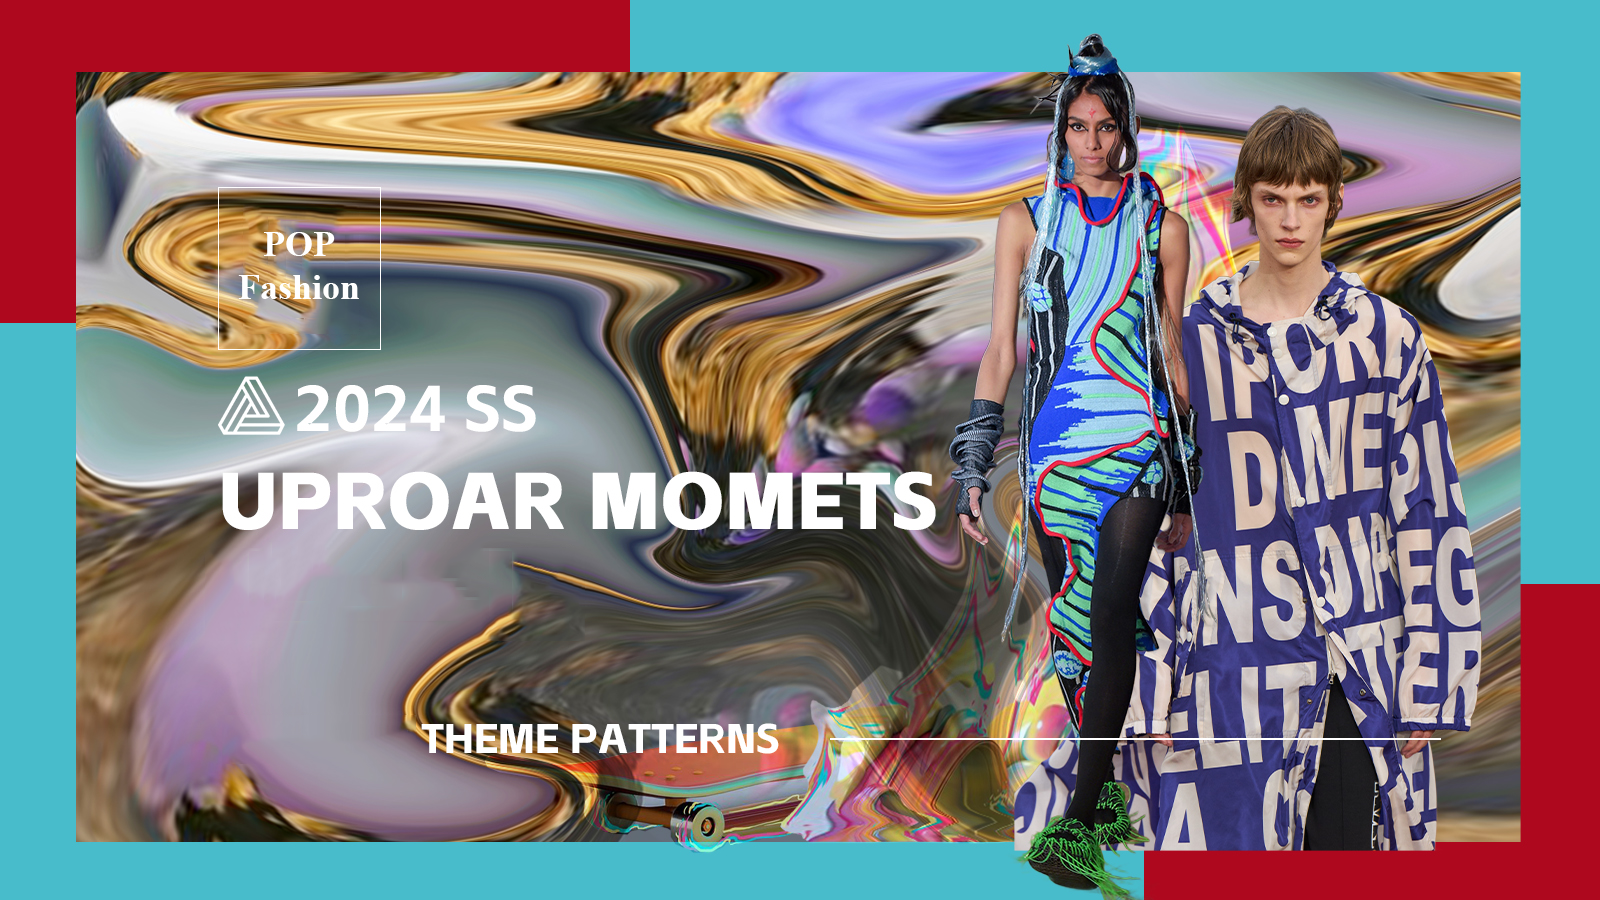 Uproar Moments -- The Spring/Summer 2024 Pattern Trend